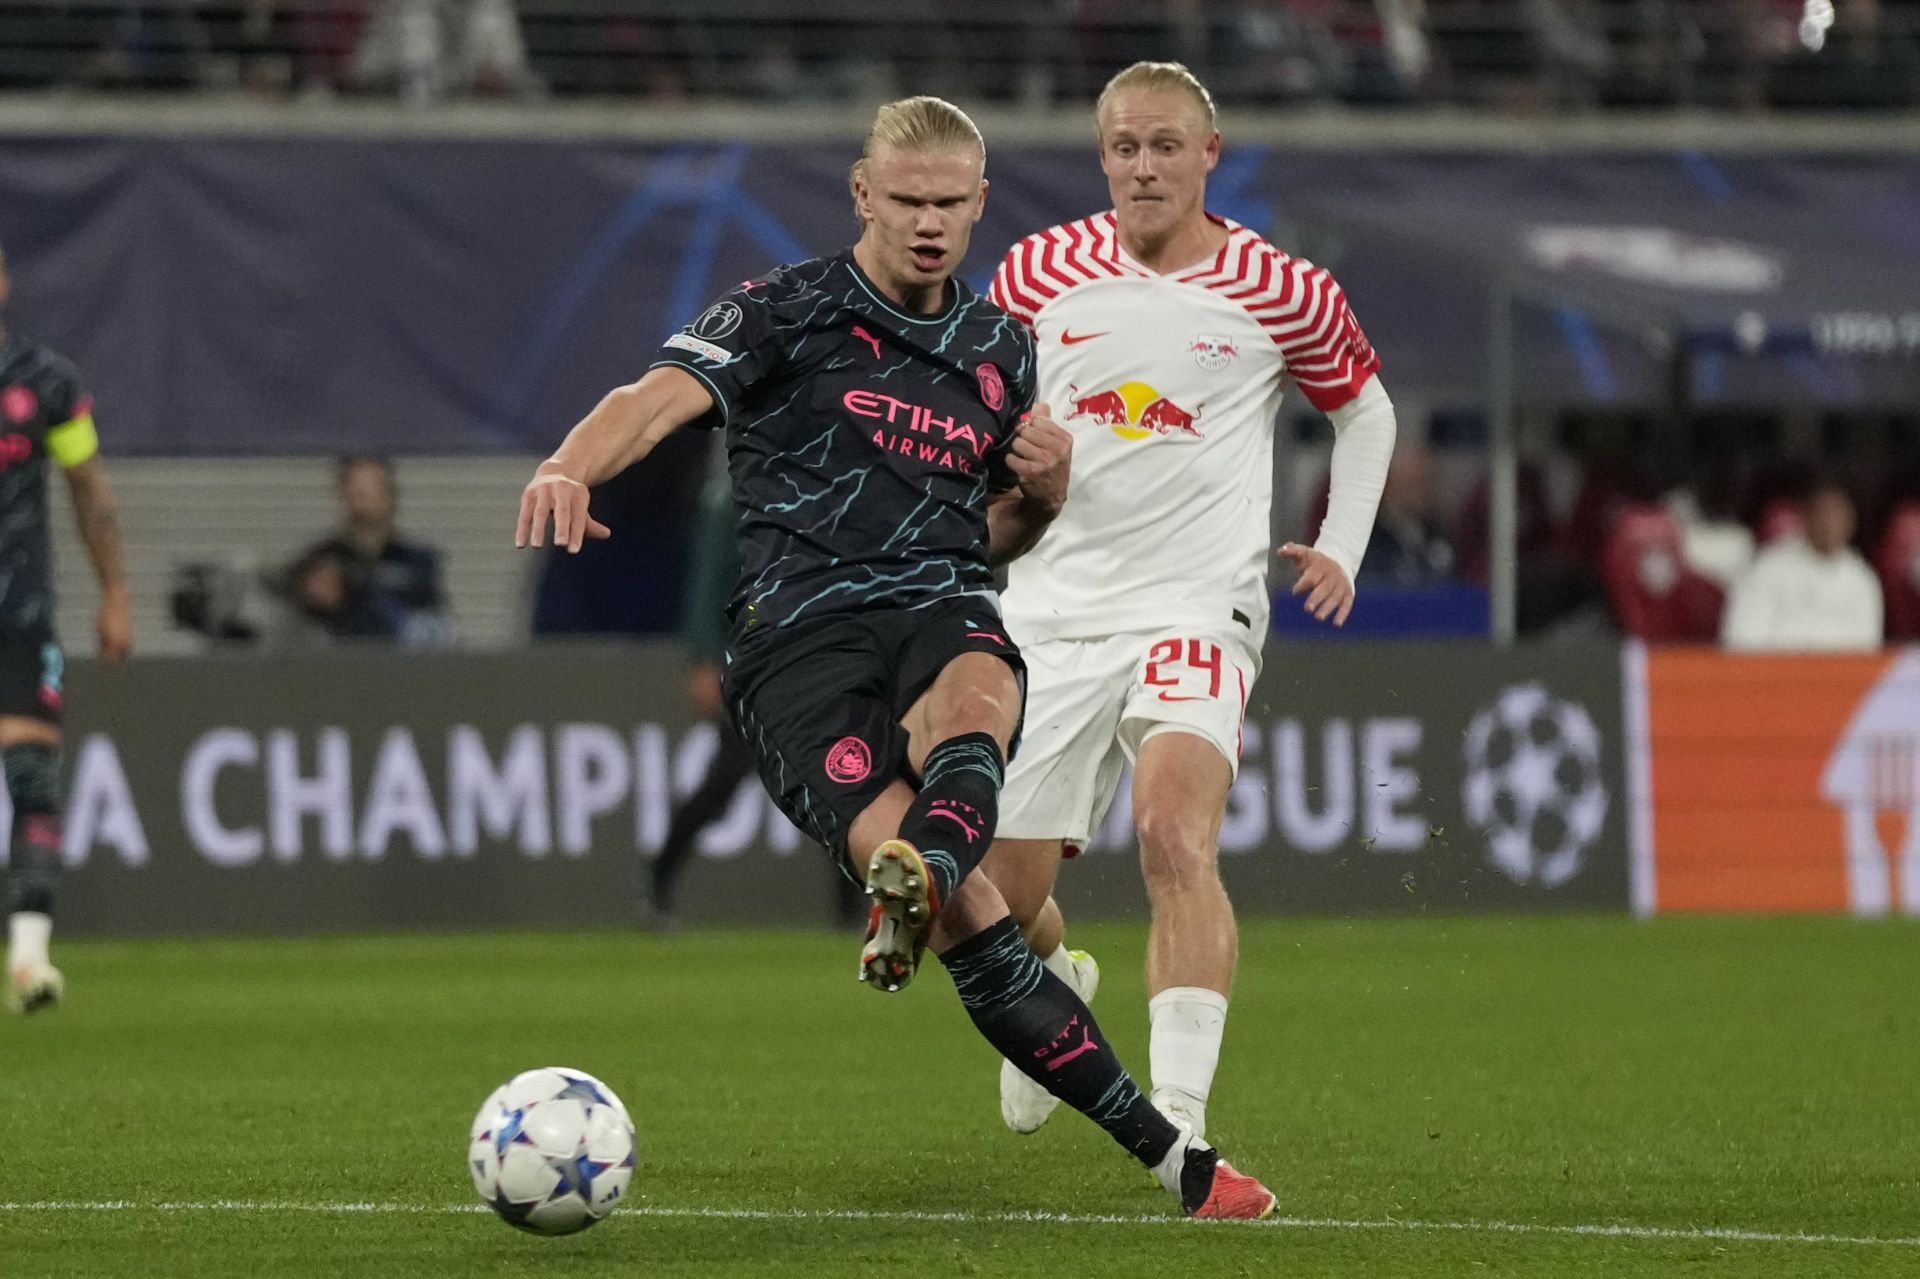 Erling Haaland is off to a good start to the season for Manchester City.